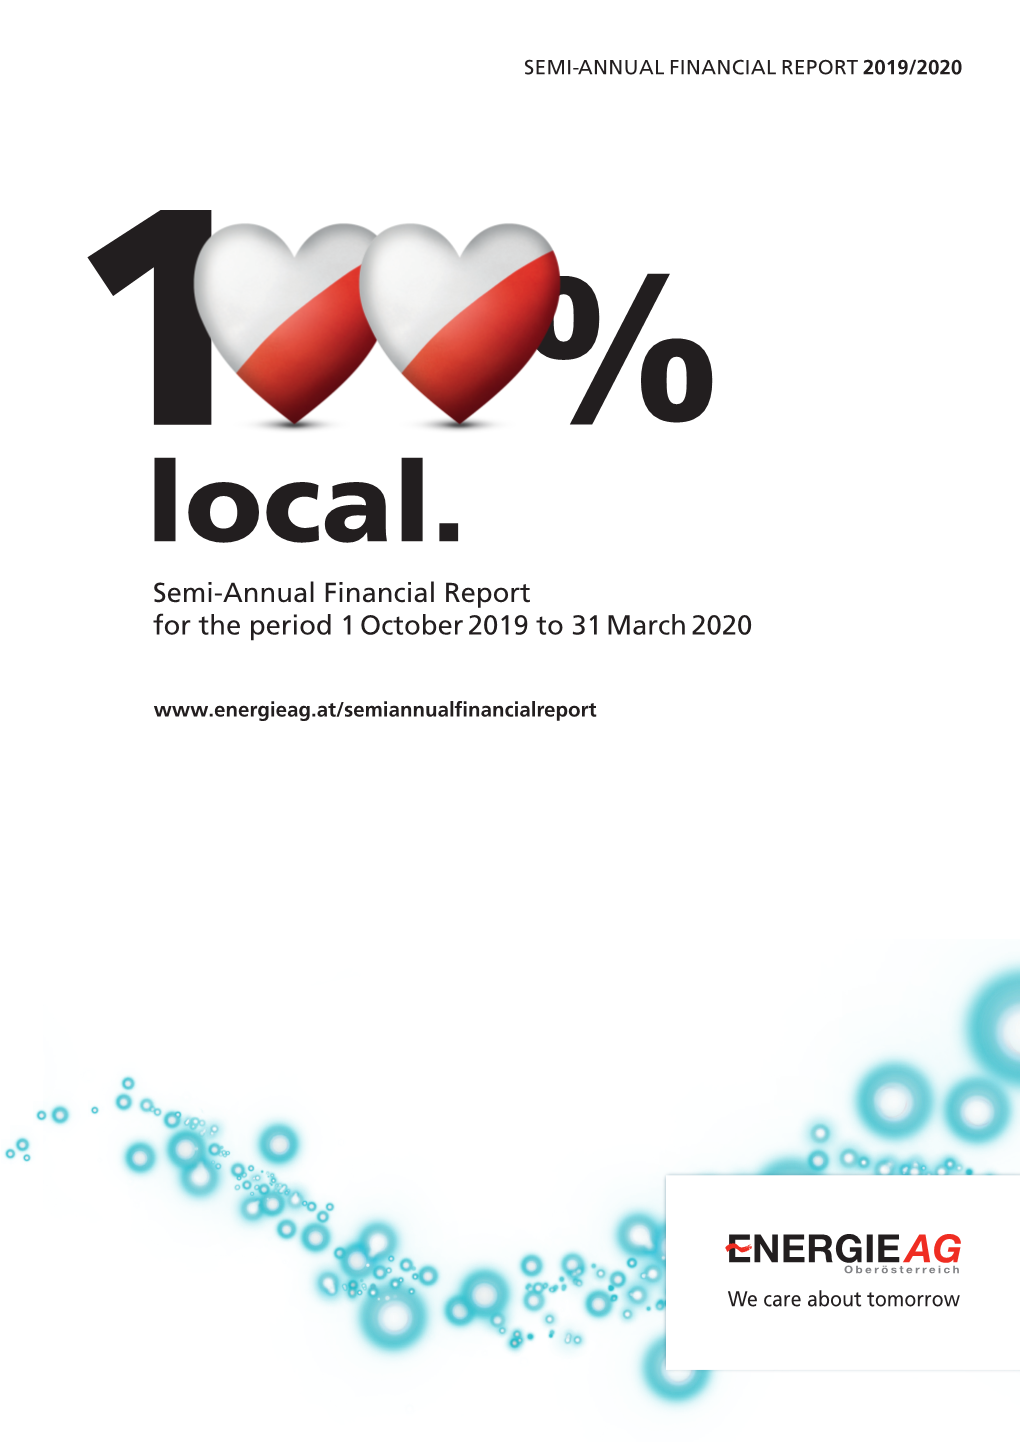 Local. Semi-Annual Financial Report for the Period 1 October 2019 to 31 March 2020